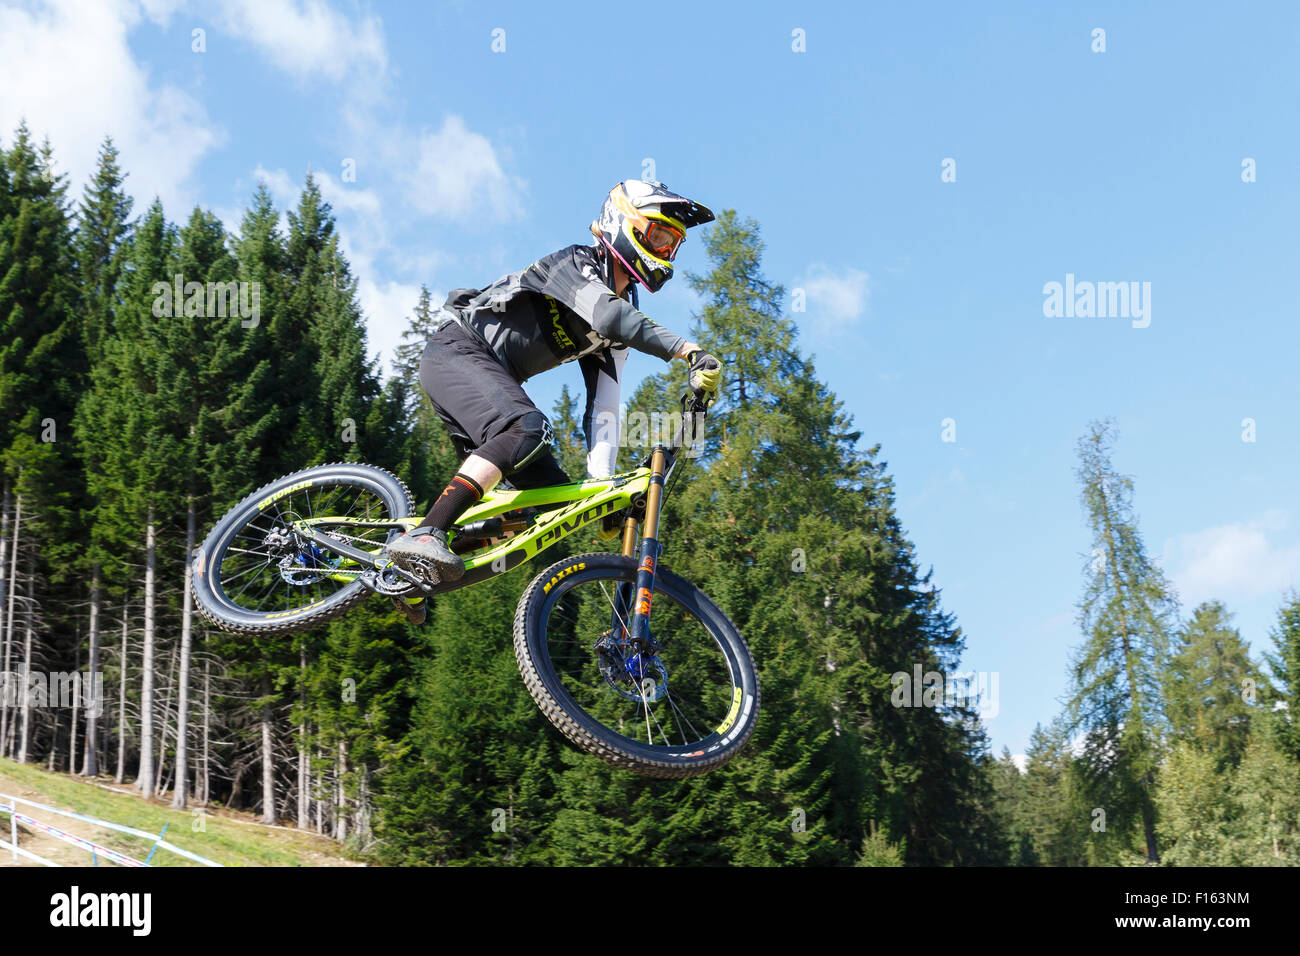 Val Di Sole, Italy - 22 August 2015: Pivot Factory Dh Team rider Kerr Bernard, in action during the mens elite Downhill Stock Photo